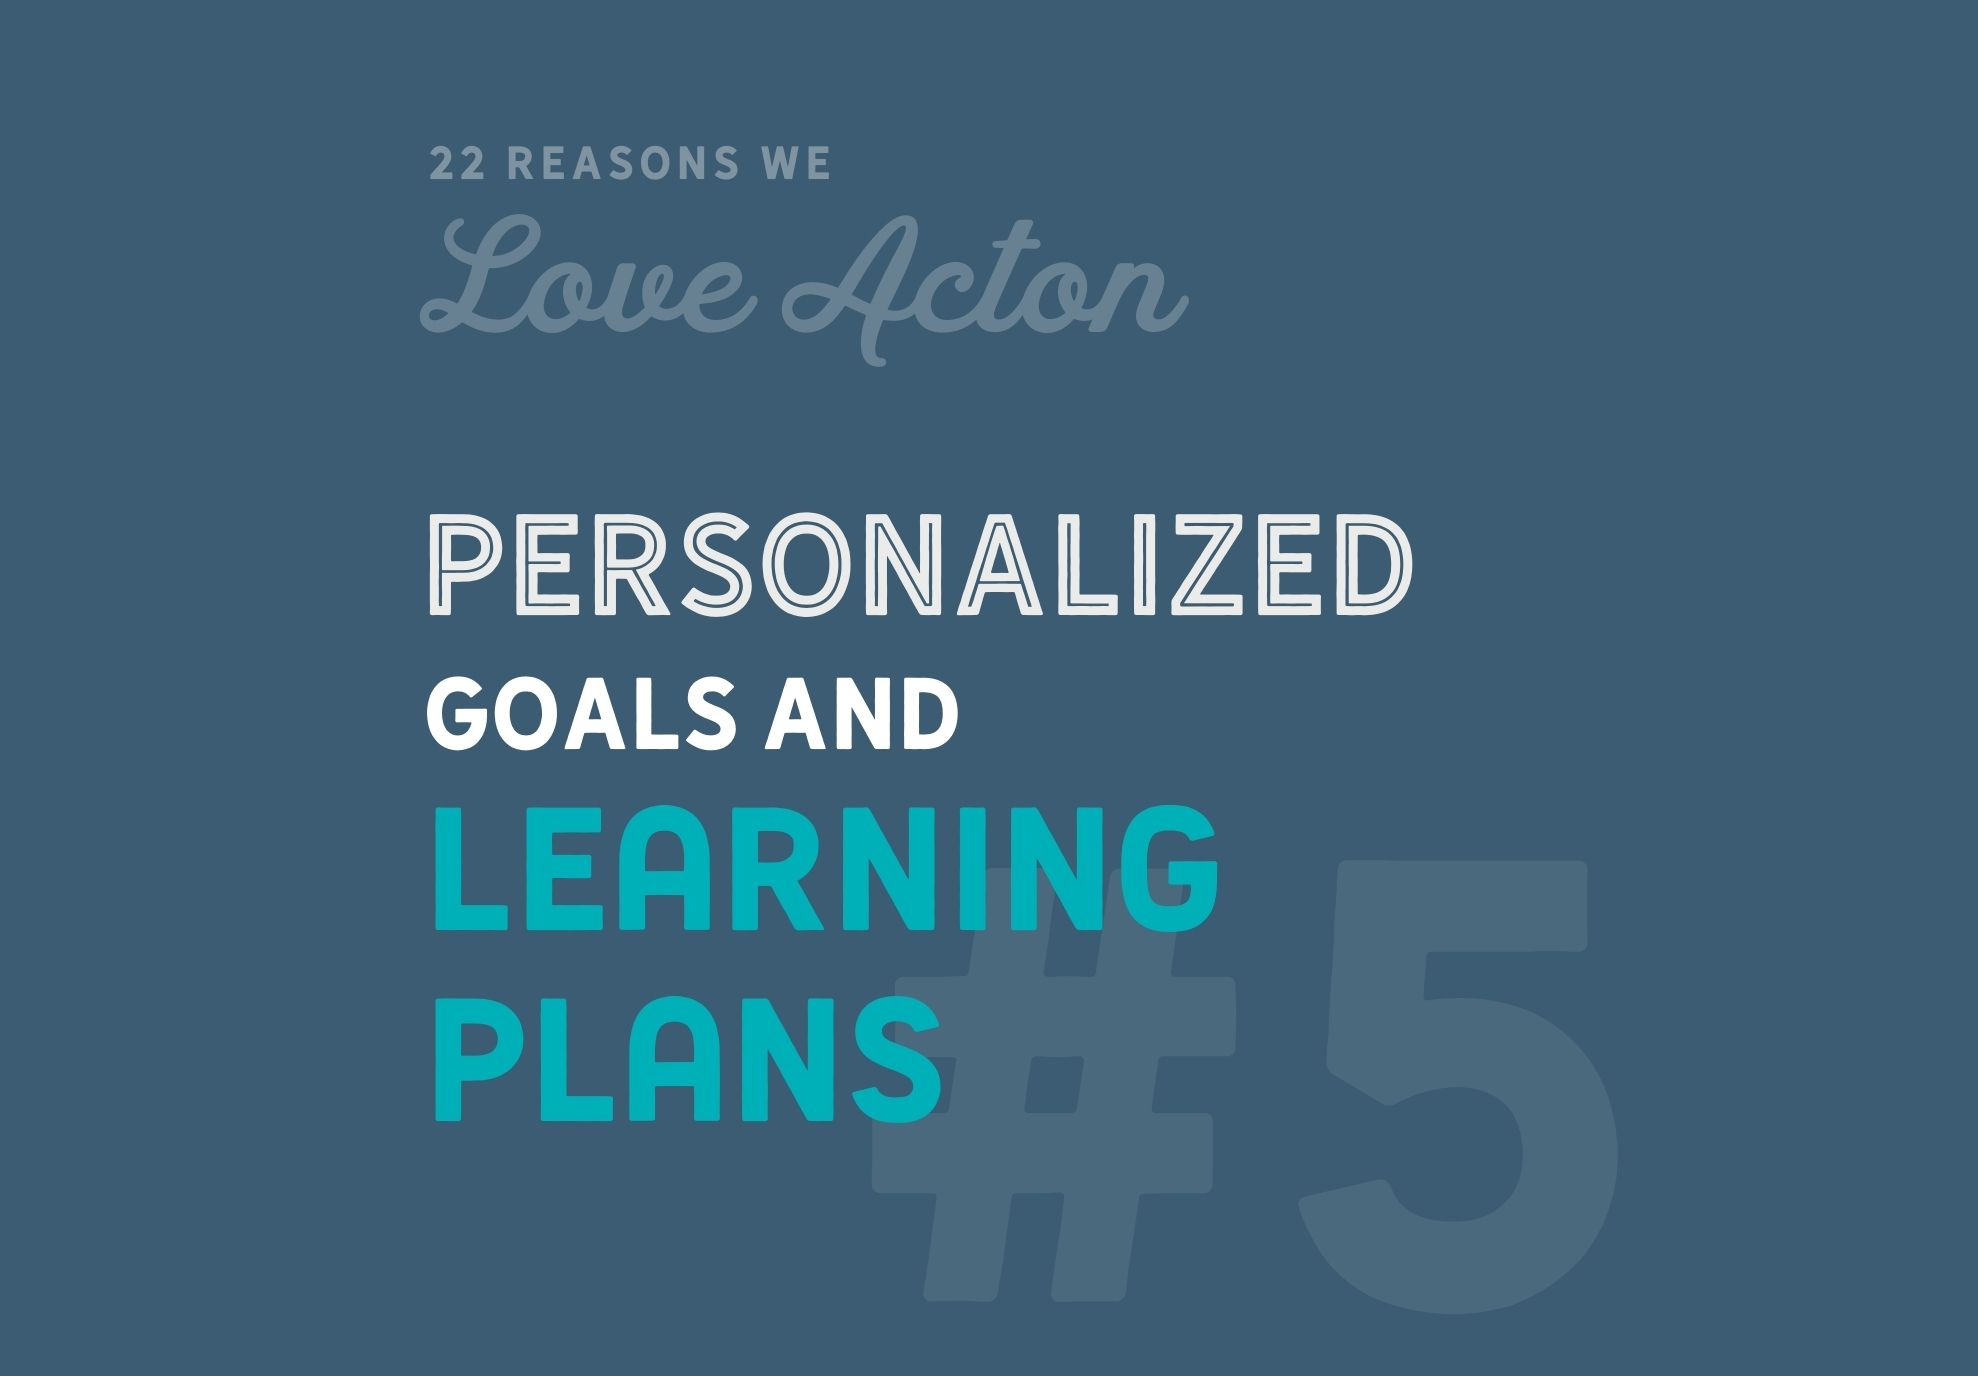 #5 Personalized Goals and Learning Plans